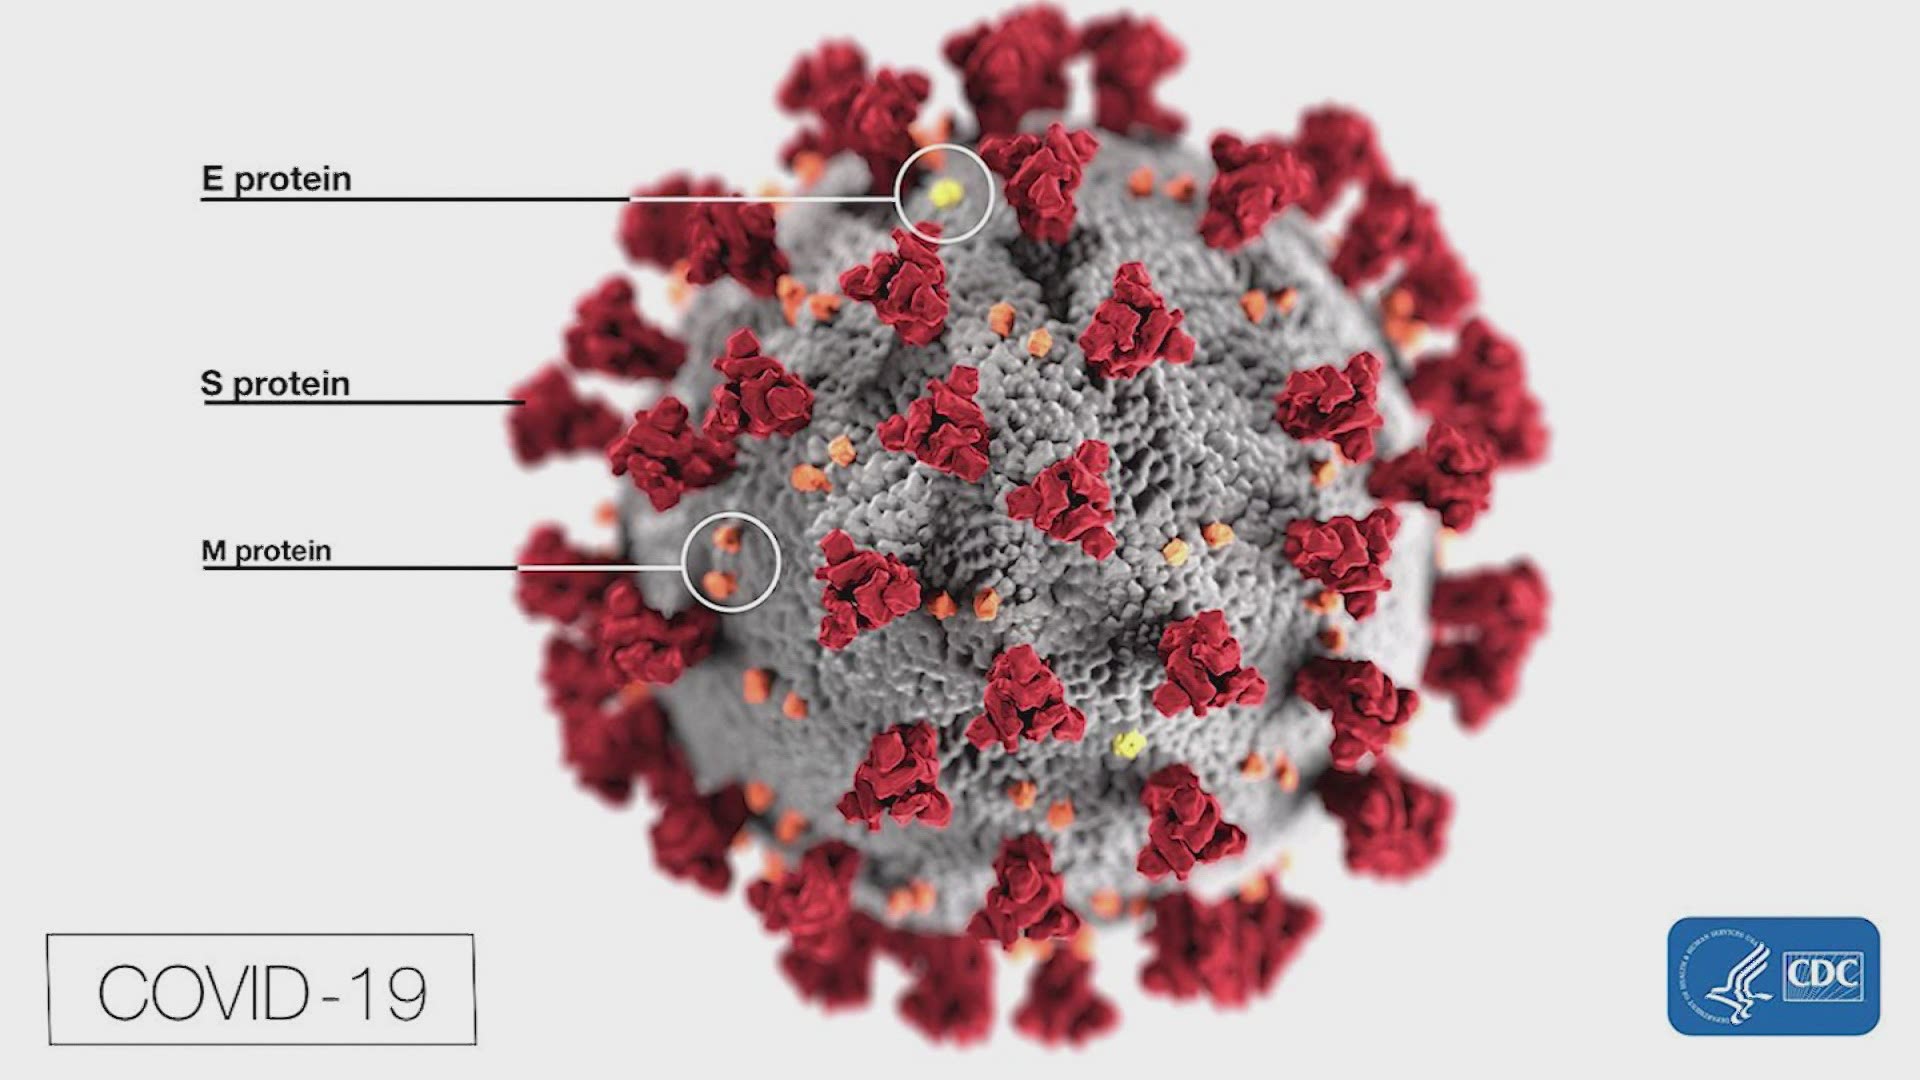 There is major progress on the development of a universal coronavirus vaccine, that could also help protect against some of the common colds, according to experts.